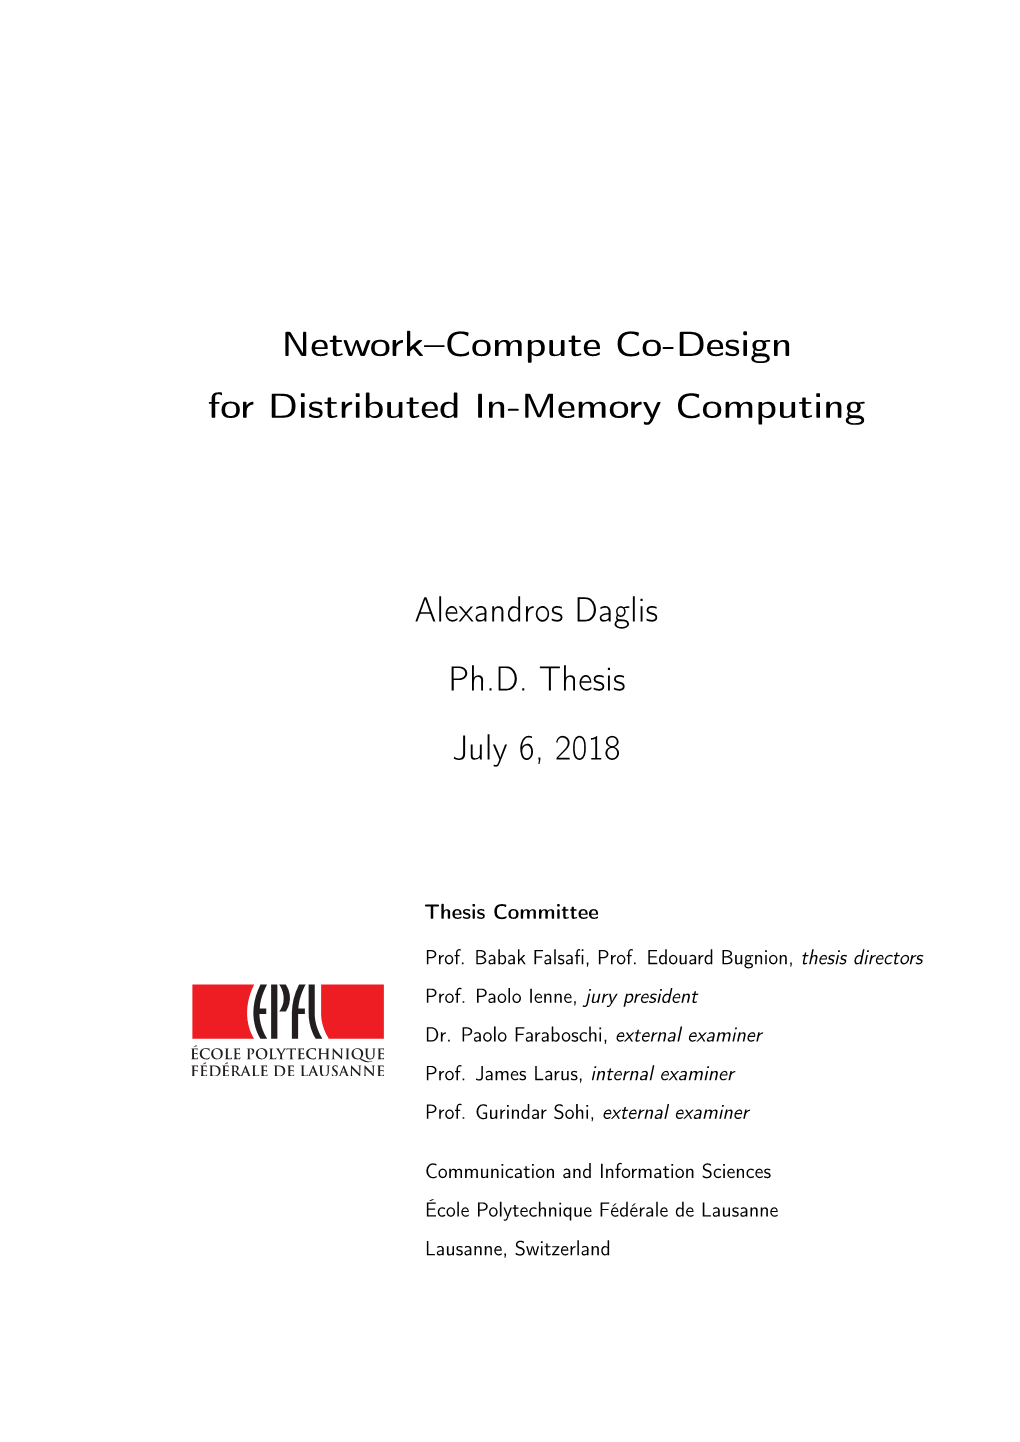 Network-Compute Co-Design for Distributed In-Memory Computing” Advisors: Prof